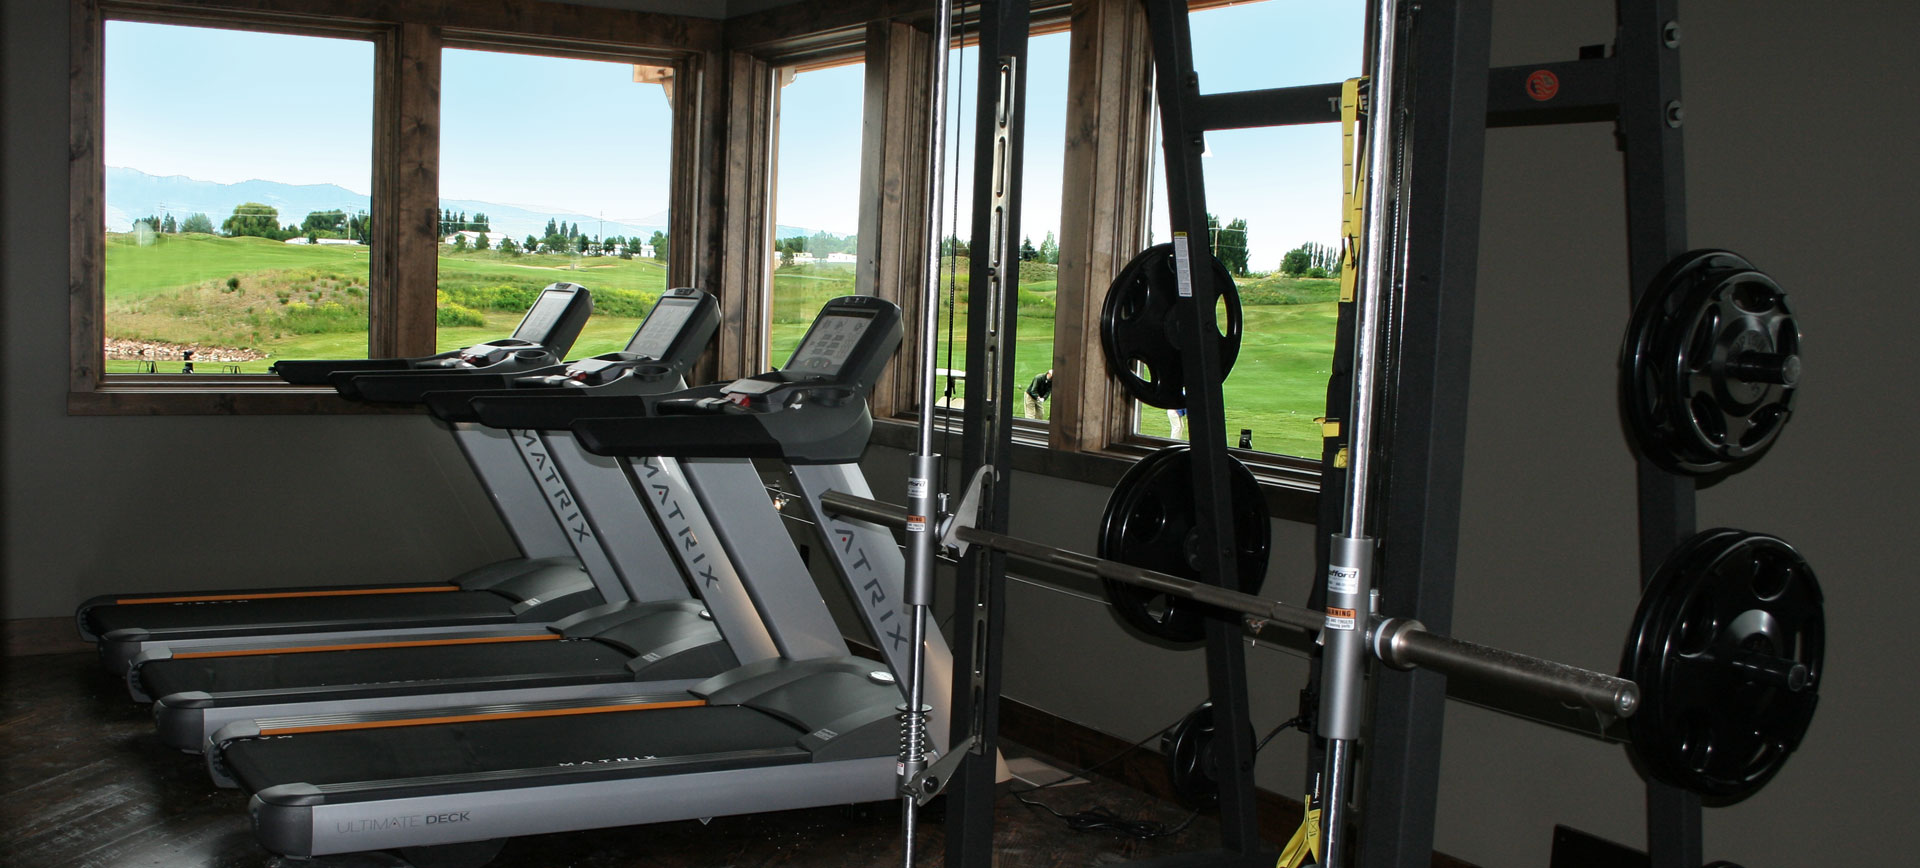 The Ranch Club Missoula, MT fitness center